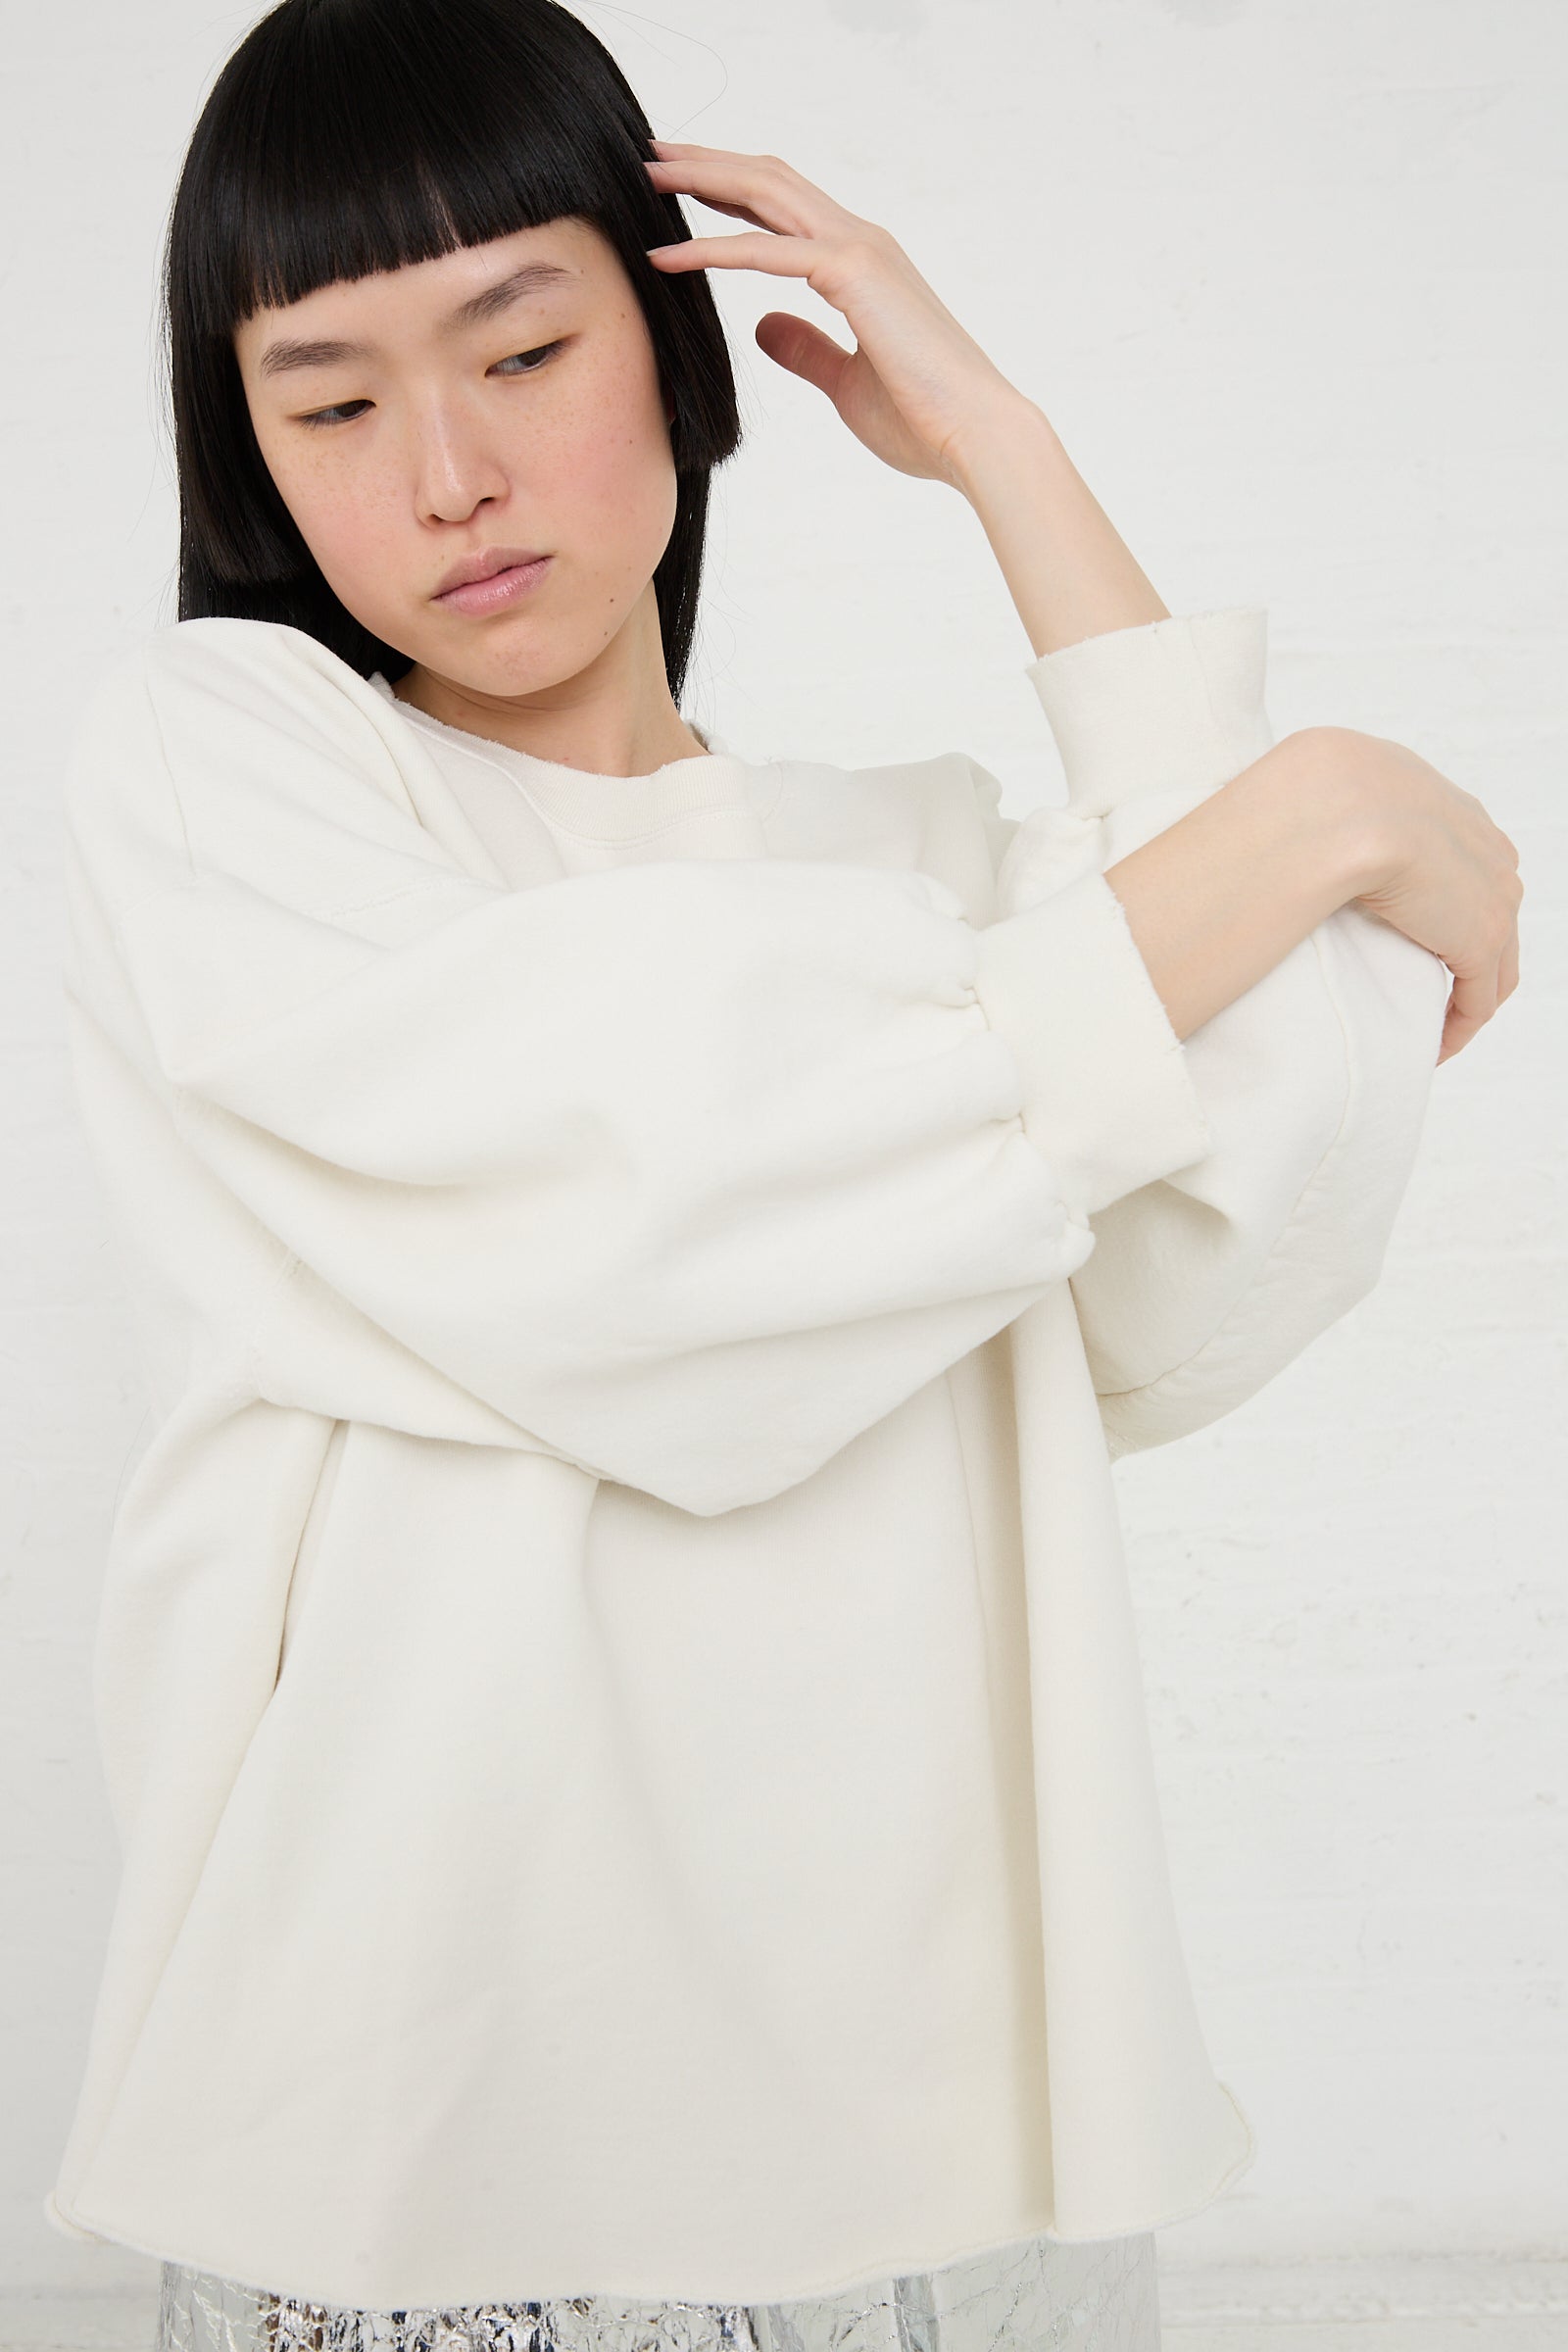 Individual in a Rachel Comey Fond Sweatshirt in Dirty White, oversized sweatshirt posing with their hand on their head.